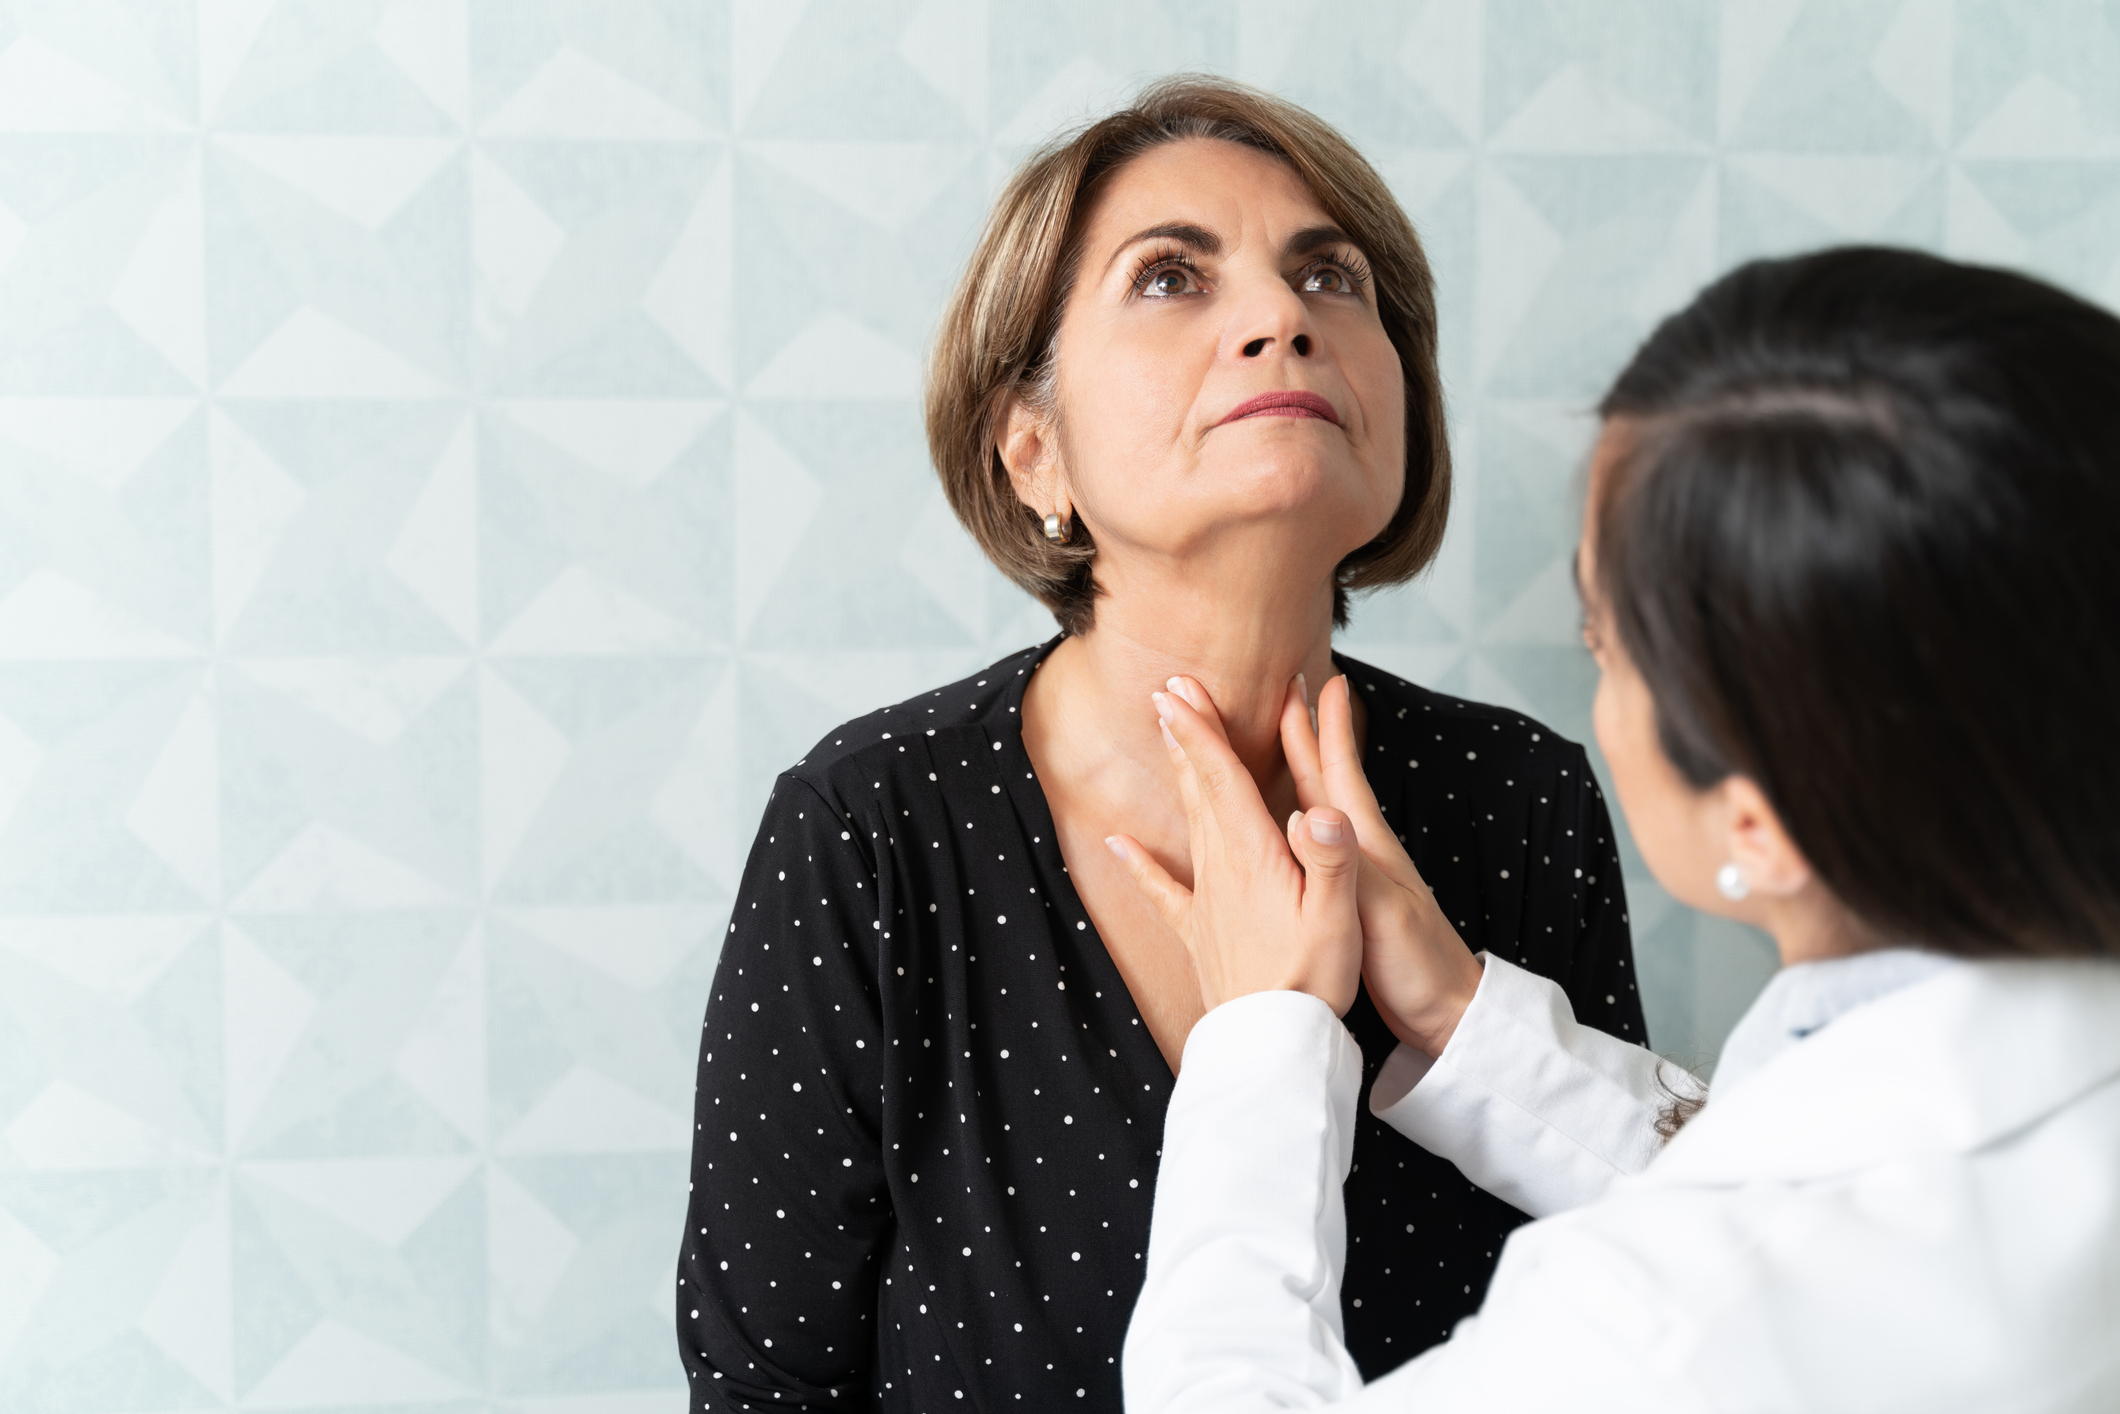 Low thyroid function causes high health risks